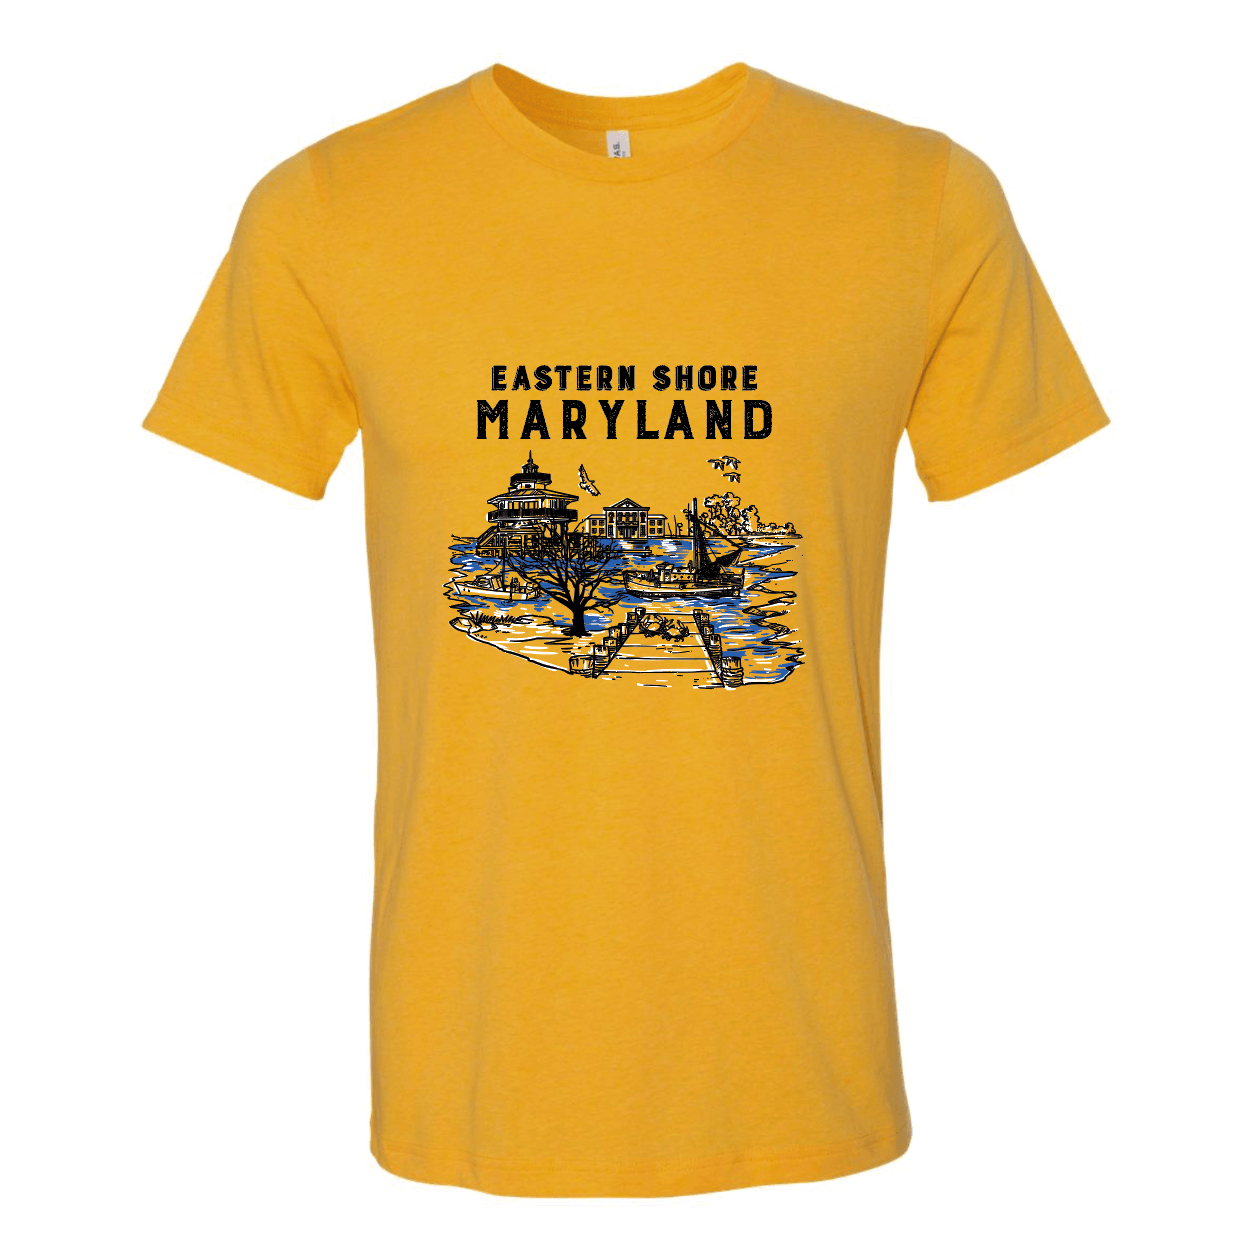 Eastern Shore Maryland (Golden Yellow) / Shirt - Route One Apparel